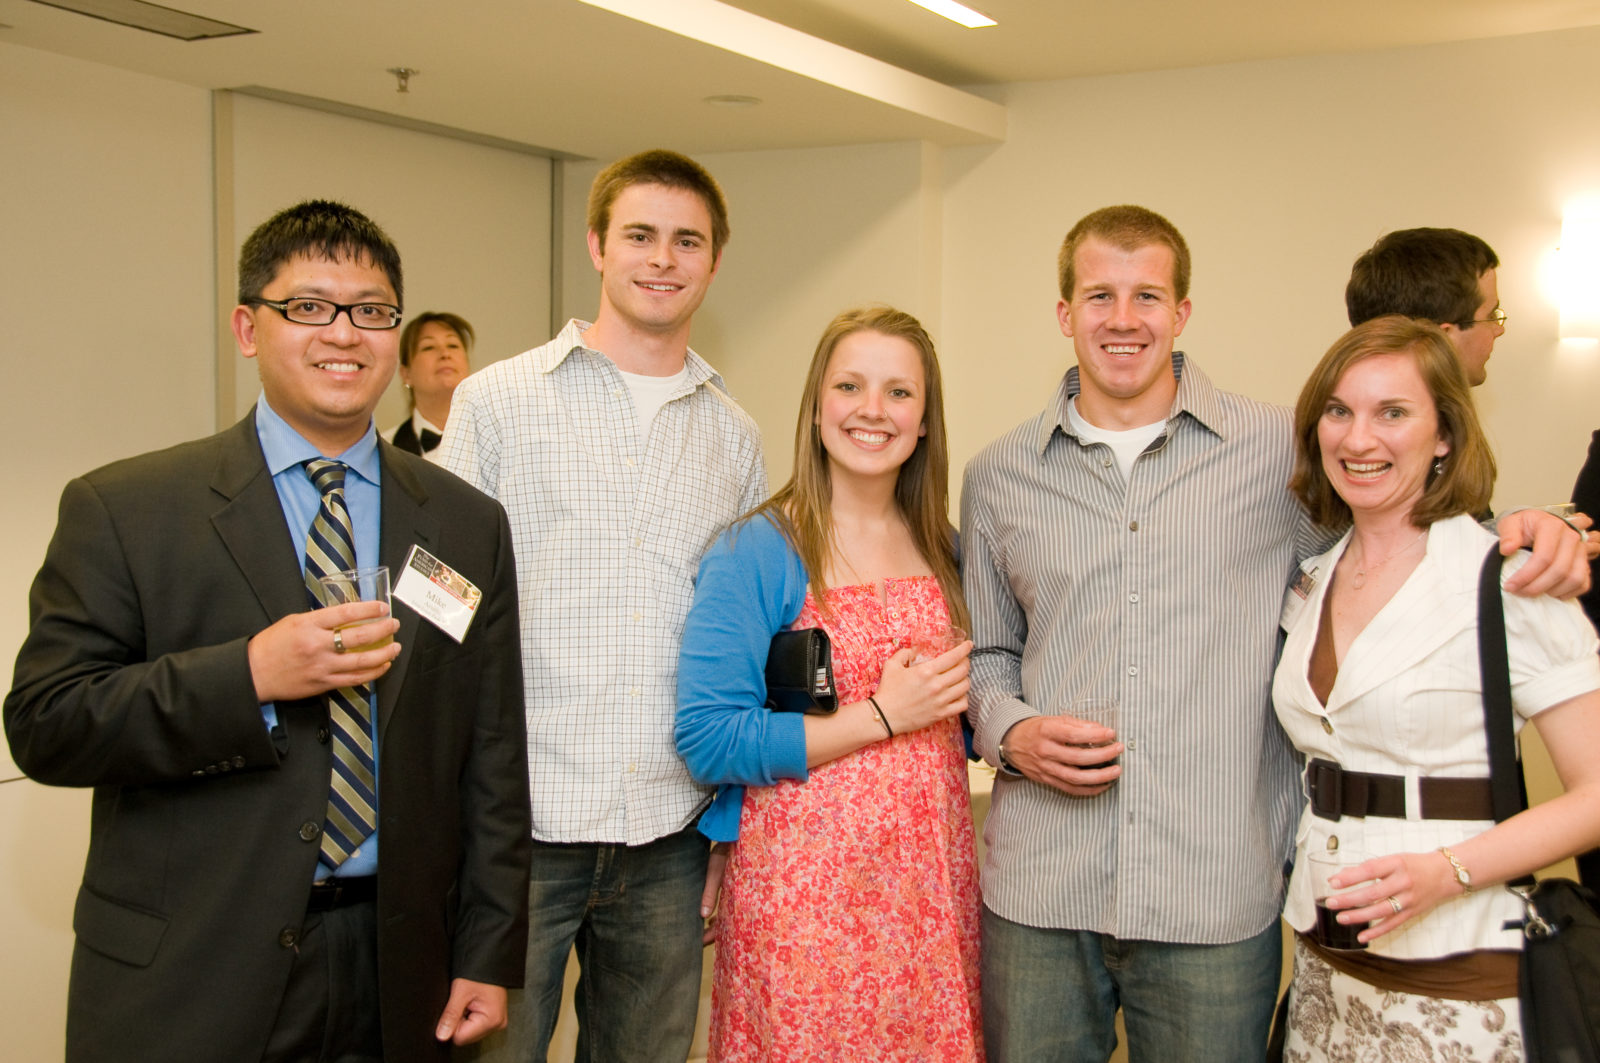 Scholars had the opportunity to interact with alumni during a networking reception at the new TFAS Building, where they met members of the Alumni Council such as Minnesota Chapter President Mike Arulfo (E 94, A 95), pictured here on the far left.